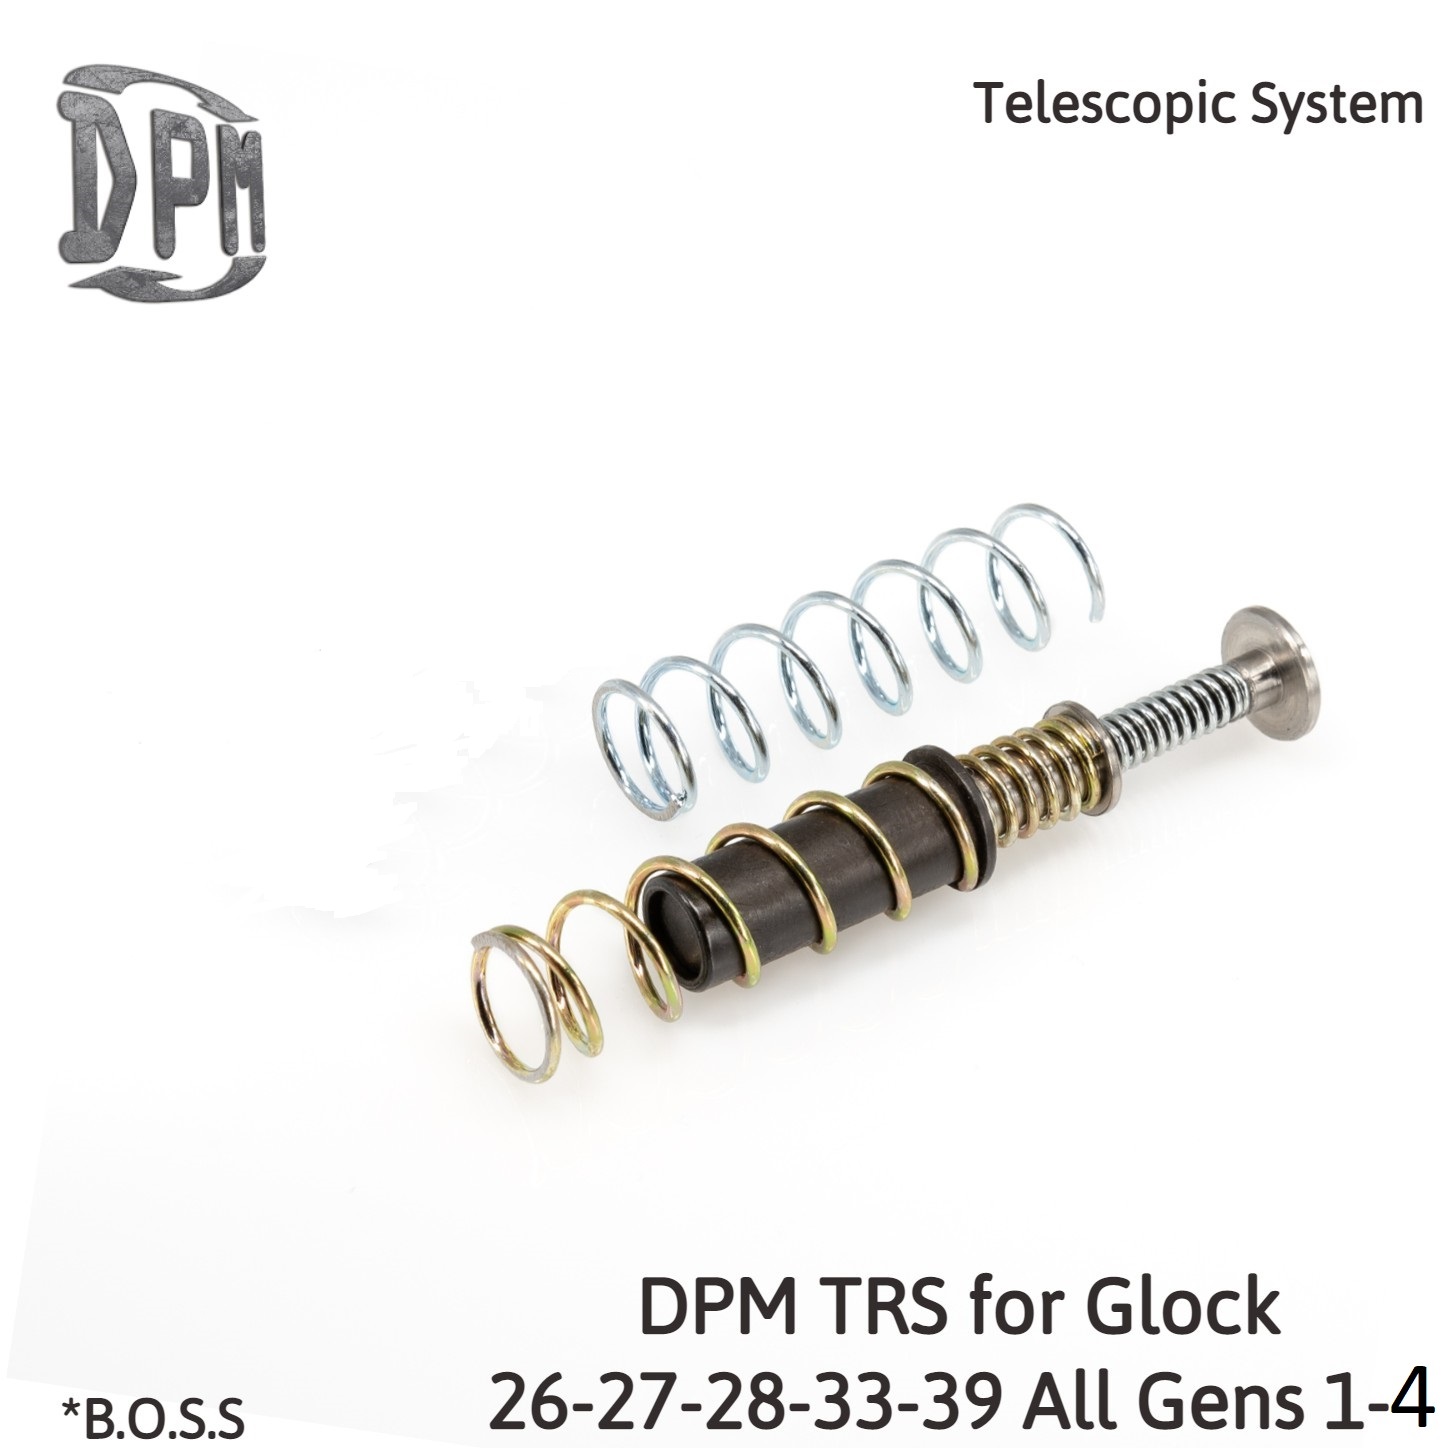 1-DPM-TRS-for-Glock-26-27-28-33-39-All-Gens-1-4 System